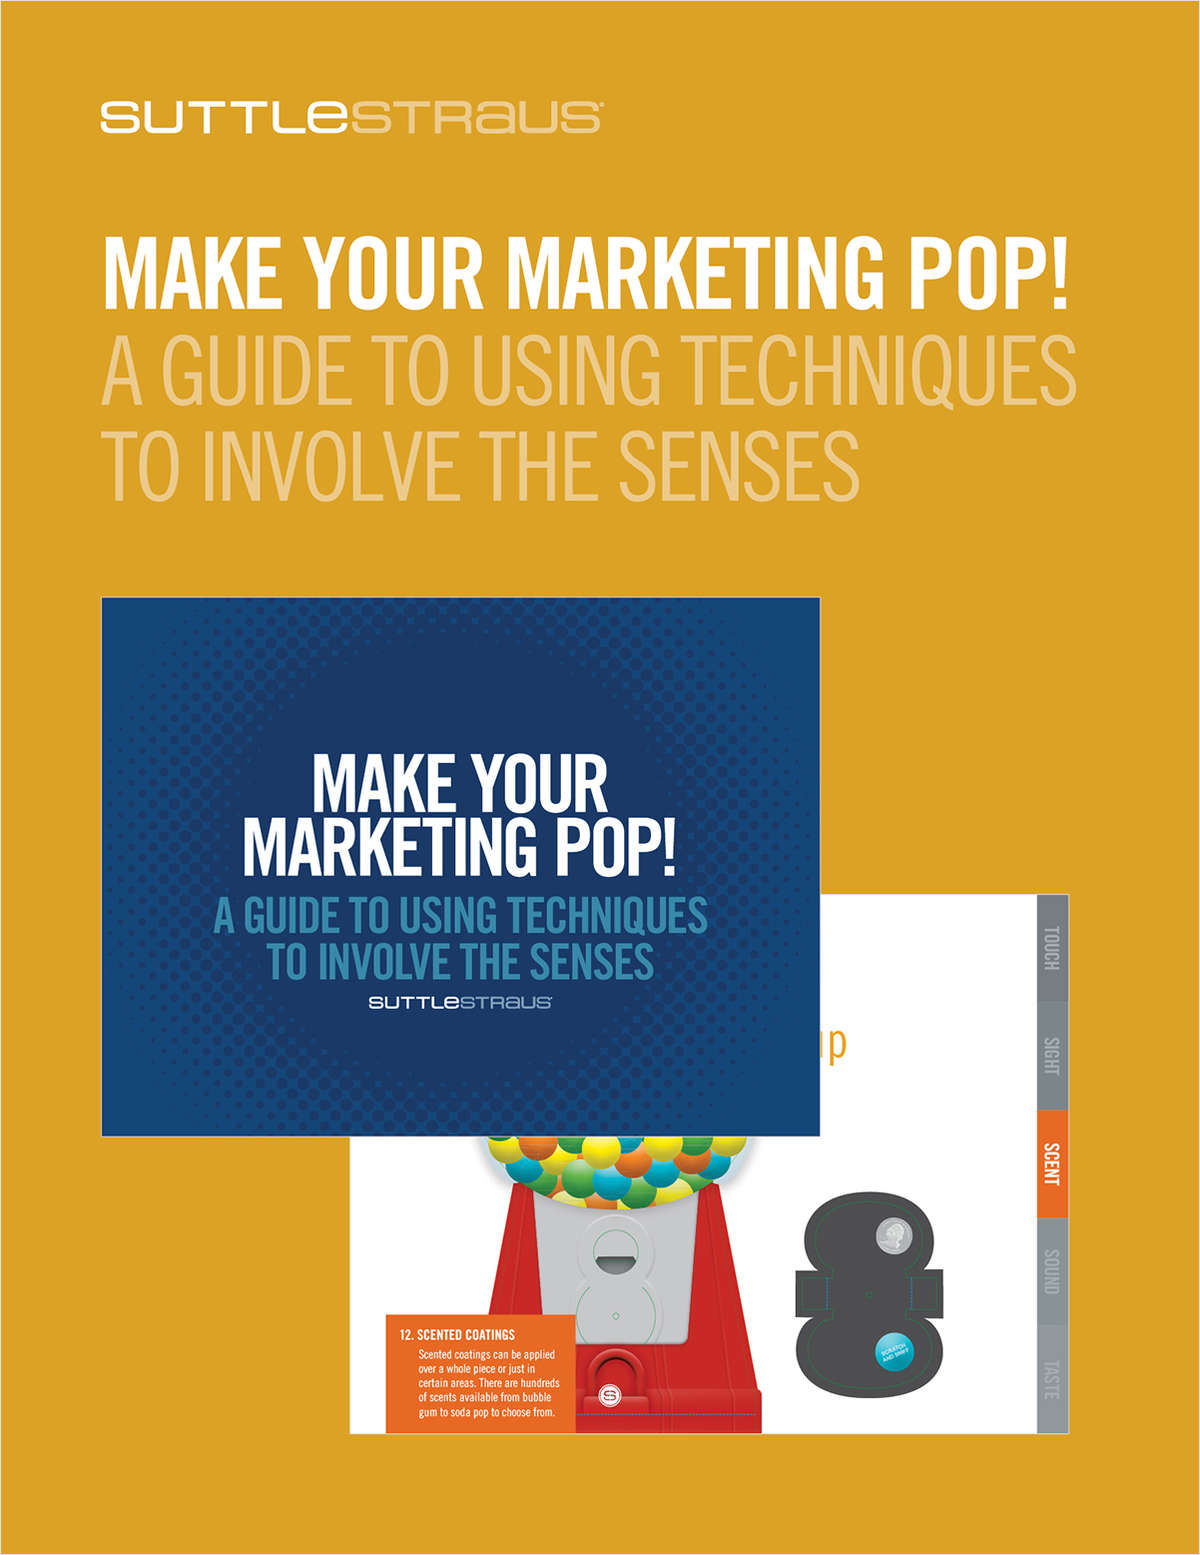 Make Your Marketing POP! A Guide to Using Techniques to Involve the Senses